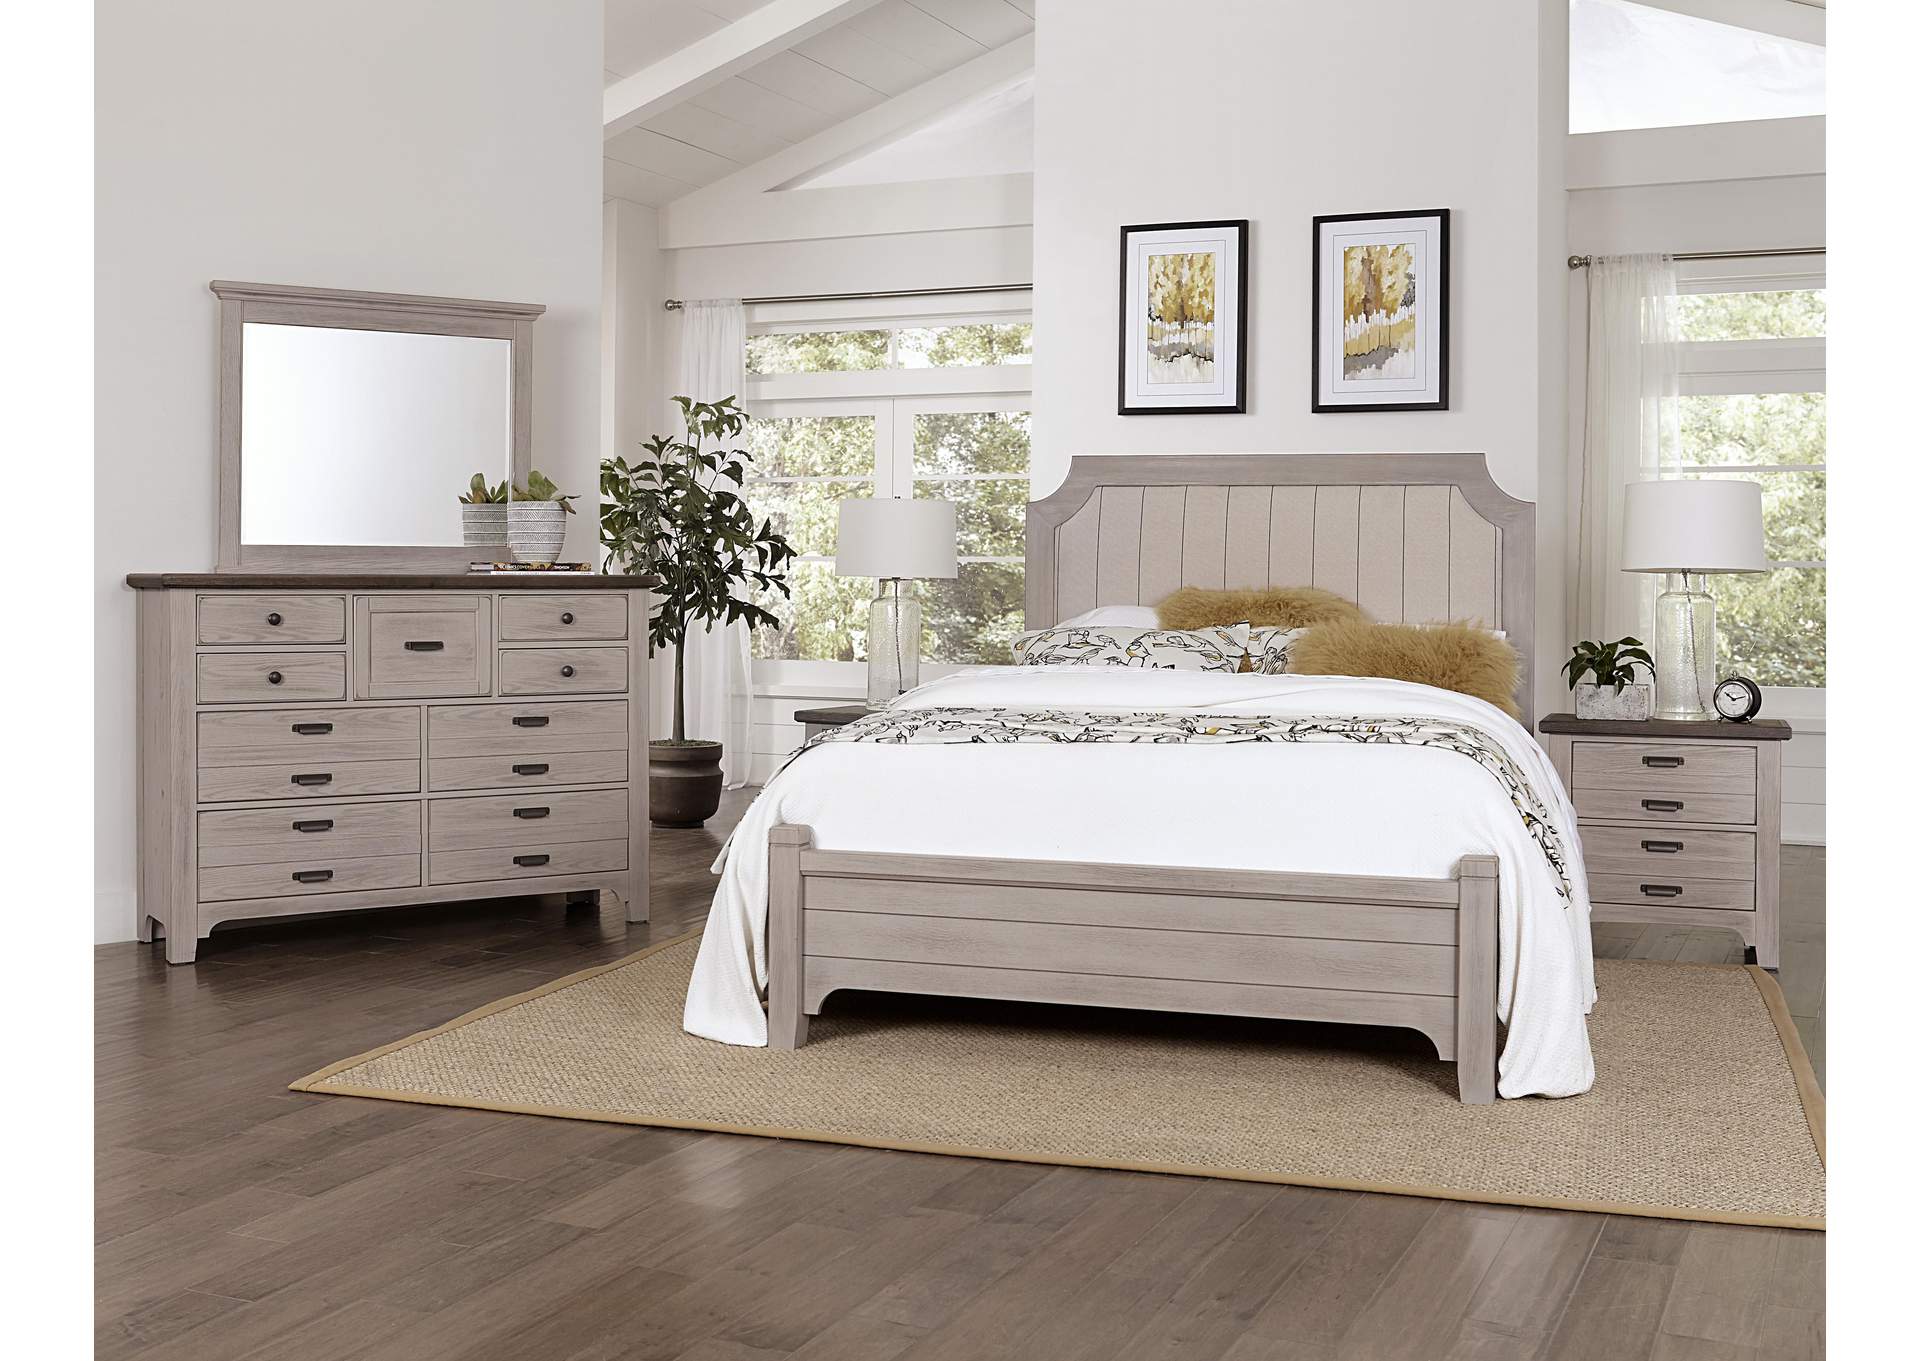 Bungalow Folkstone  King Upholstered Bed,Vaughan-Bassett